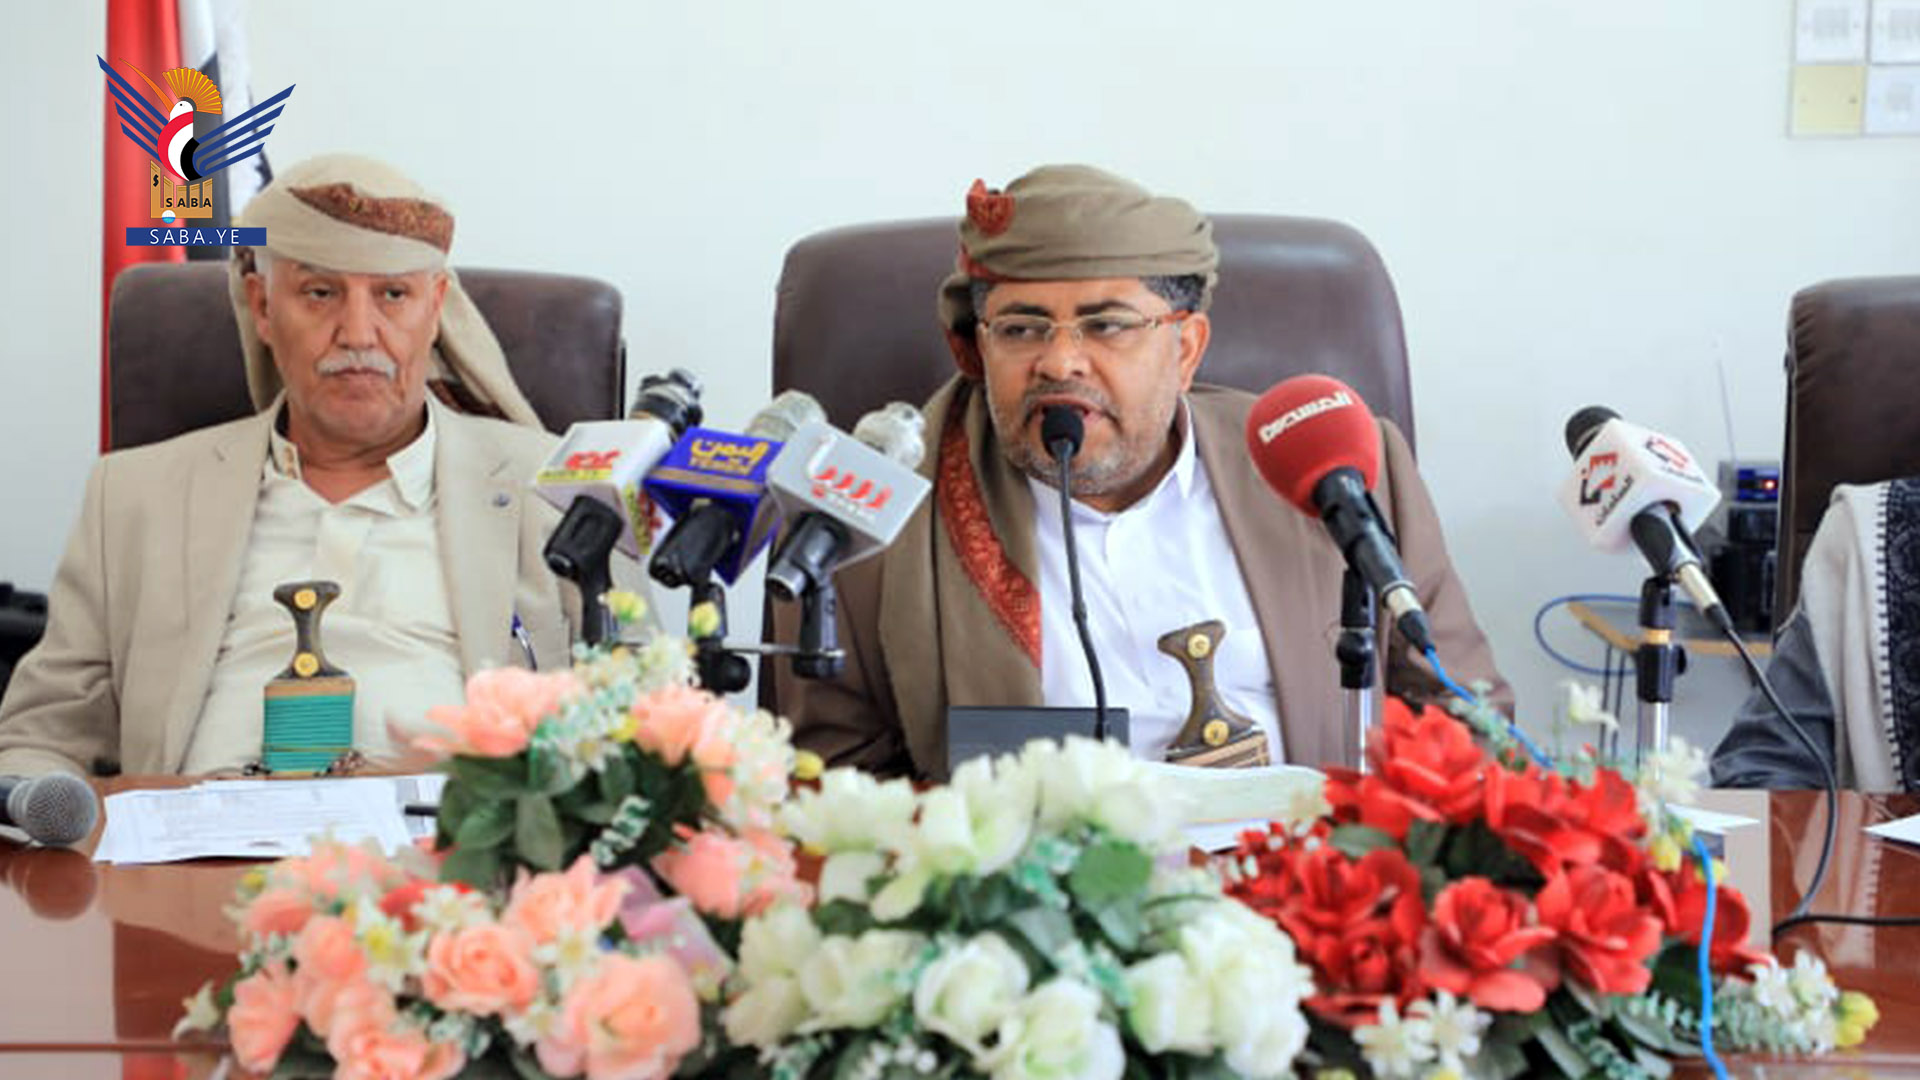 Al-Houthi chairs Coordinating Committee of Justice System in Ibb